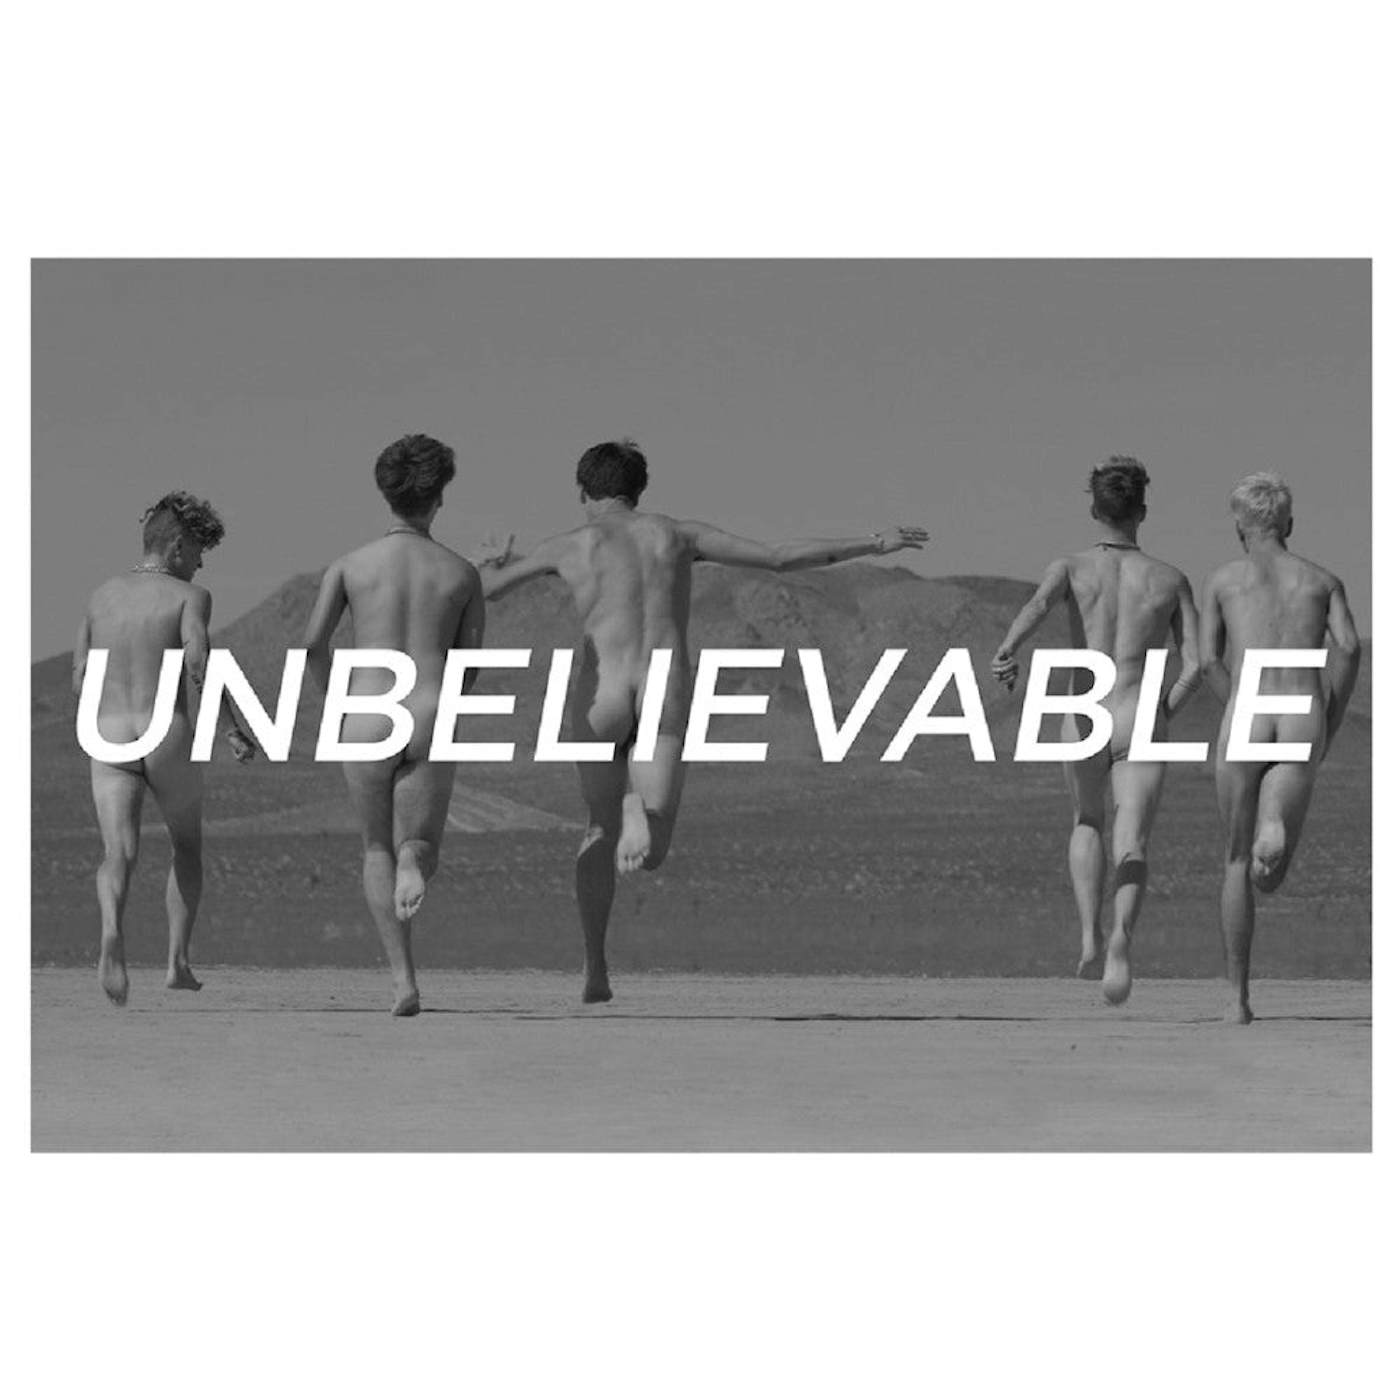 Why Don't We Unbelievable Poster (24x36)